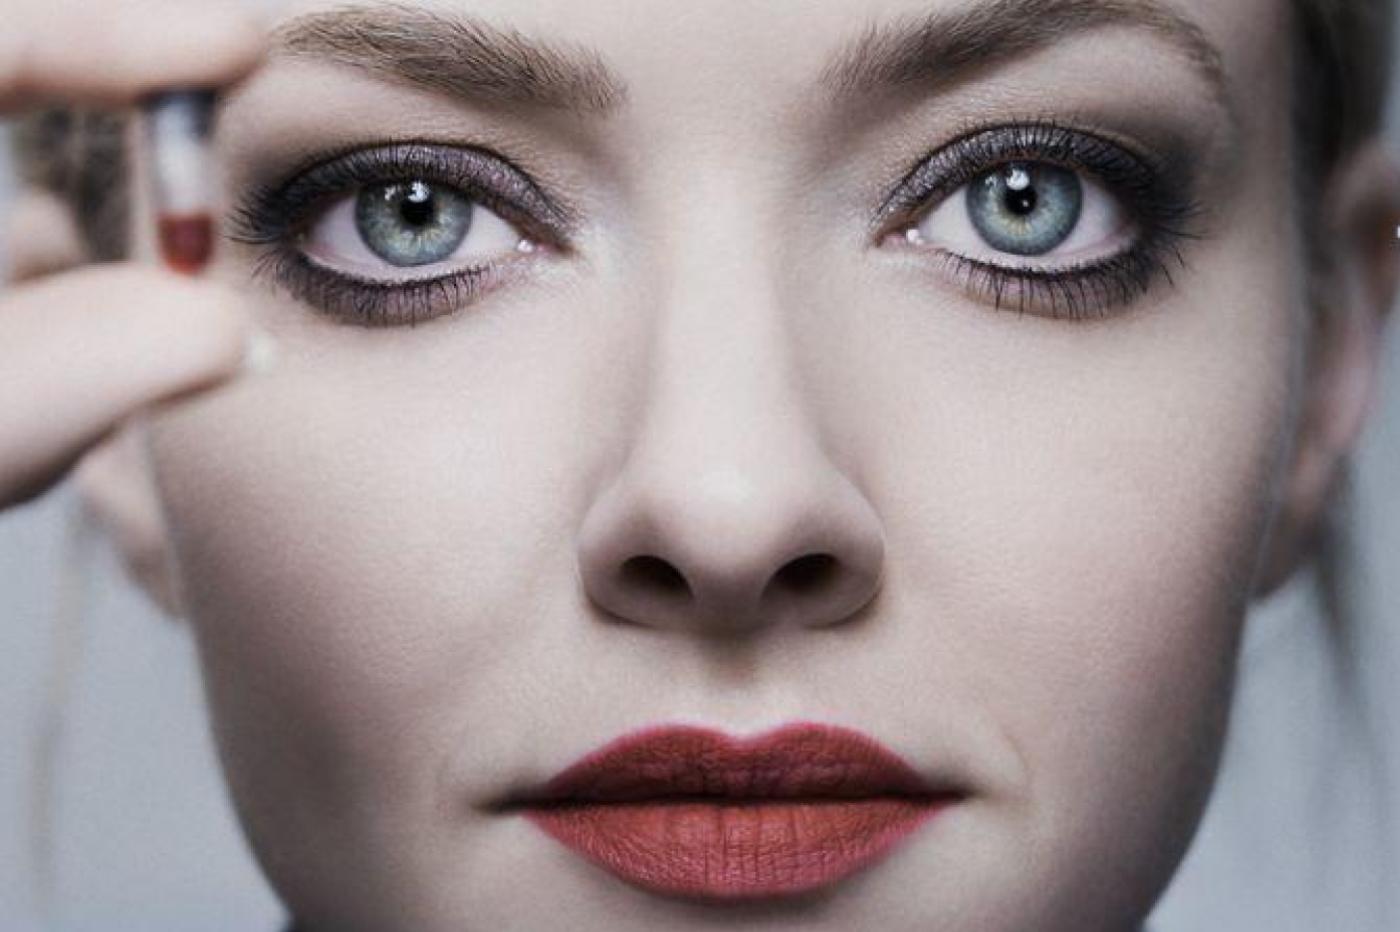 Promotional image from The Dropout series showing Amanda Seyfried as Elizabeth Holmes showing the infamous Theranos blood capsule